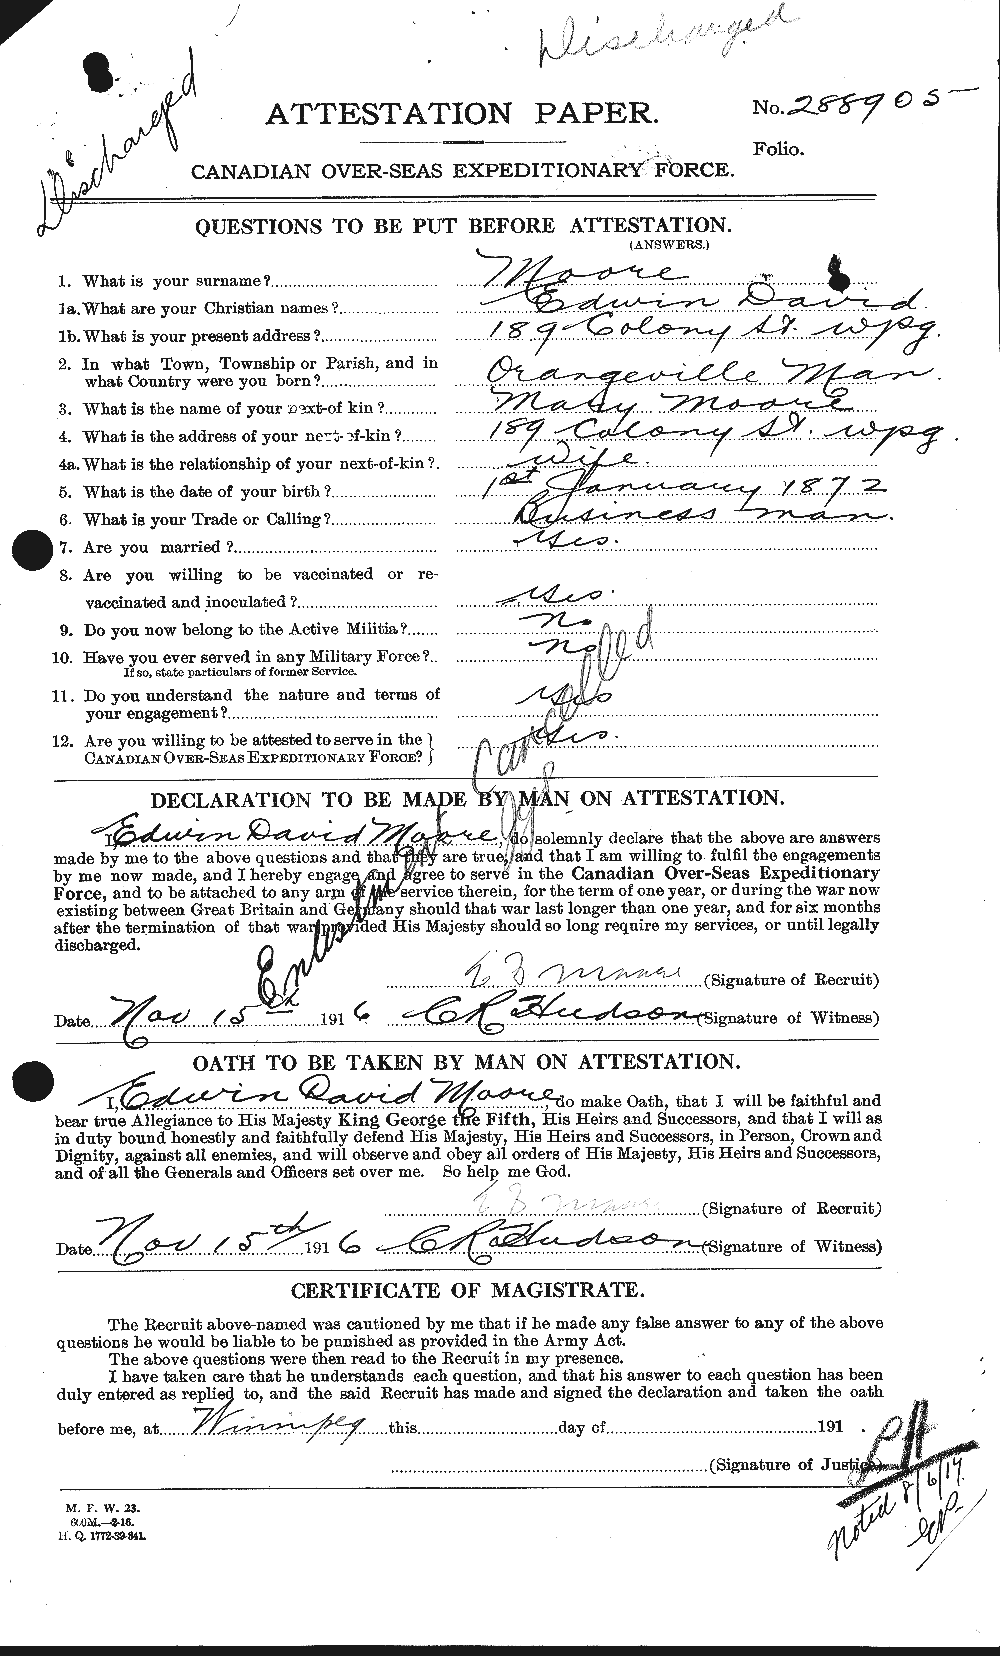 Personnel Records of the First World War - CEF 506641a